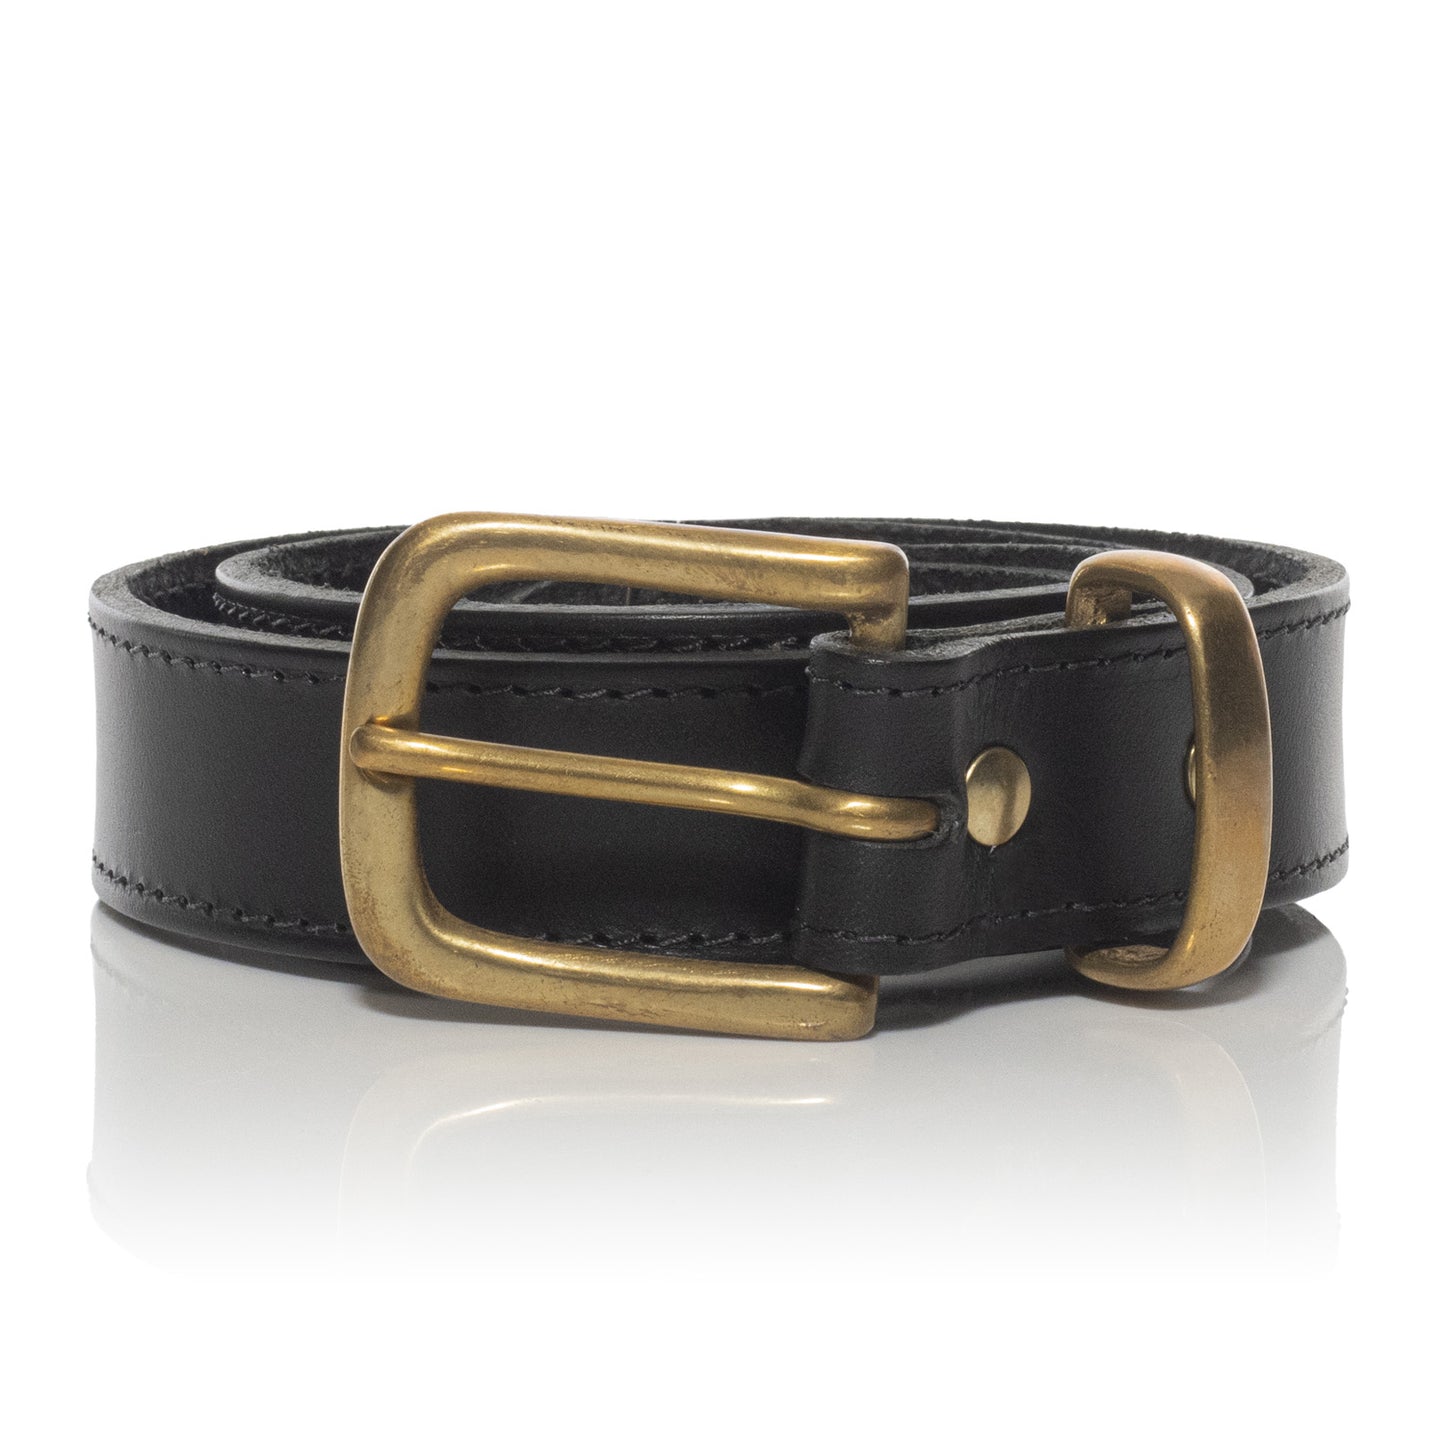 Lady Orion Black Belt with Gold Buckle